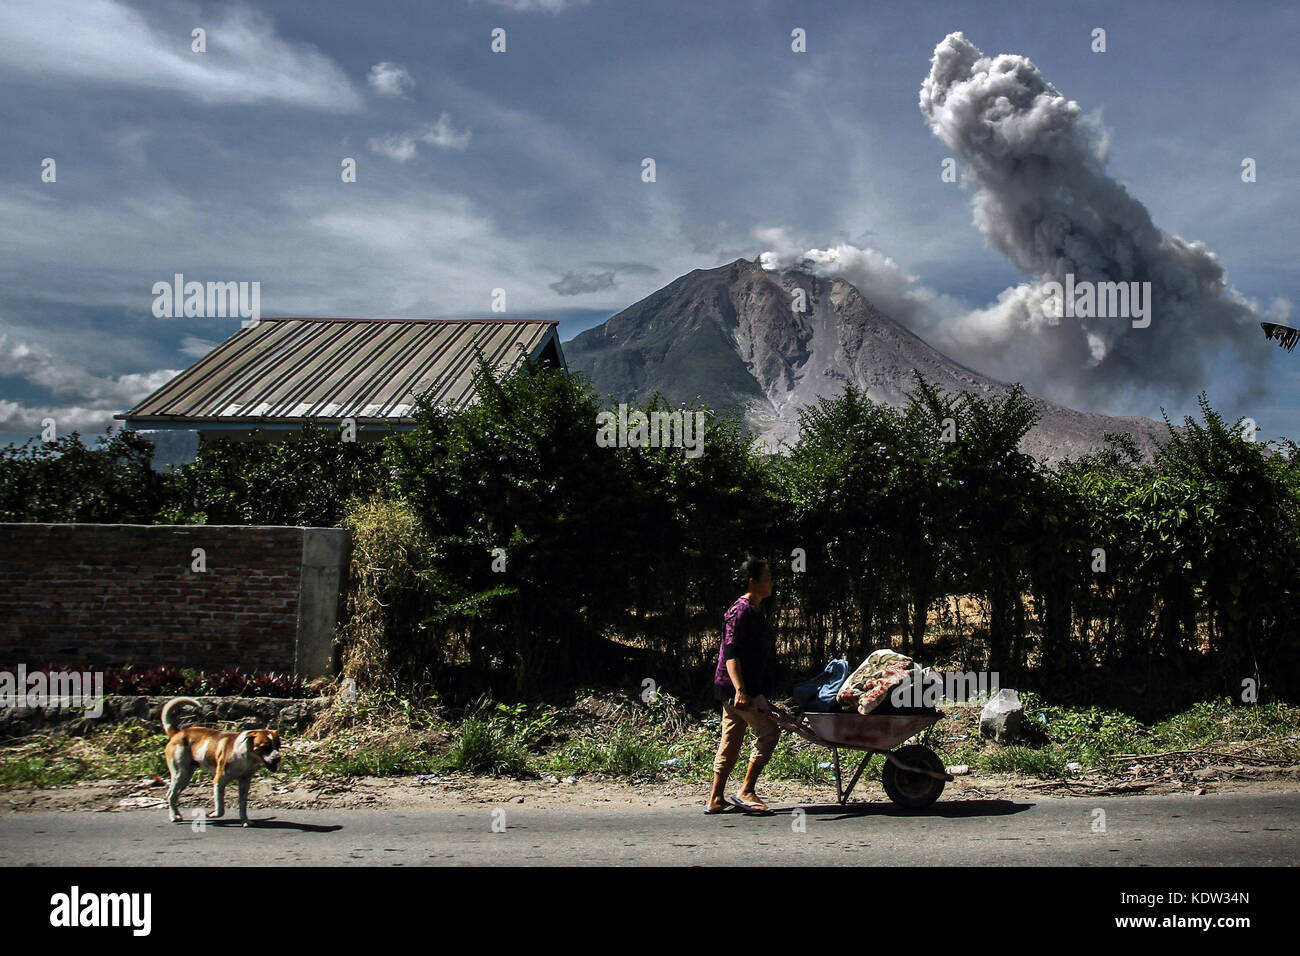 Karo, North Sumatra, Indonesia. 16th Oct, 2017. The villagers of Tiga Pancur walk near the volcano of Mount Sinabung which spewed dust as seen in Karo, North Sumatera province. Thousands were evacuated after Mount Sinabung started erupting and spewing ash half a kilometre into the air. The volcano began erupting in 2010 after lying dormant for four centuries. A large eruption in May 2016 killed seven people. Credit: Ivan Damanik/ZUMA Wire/Alamy Live News Stock Photo